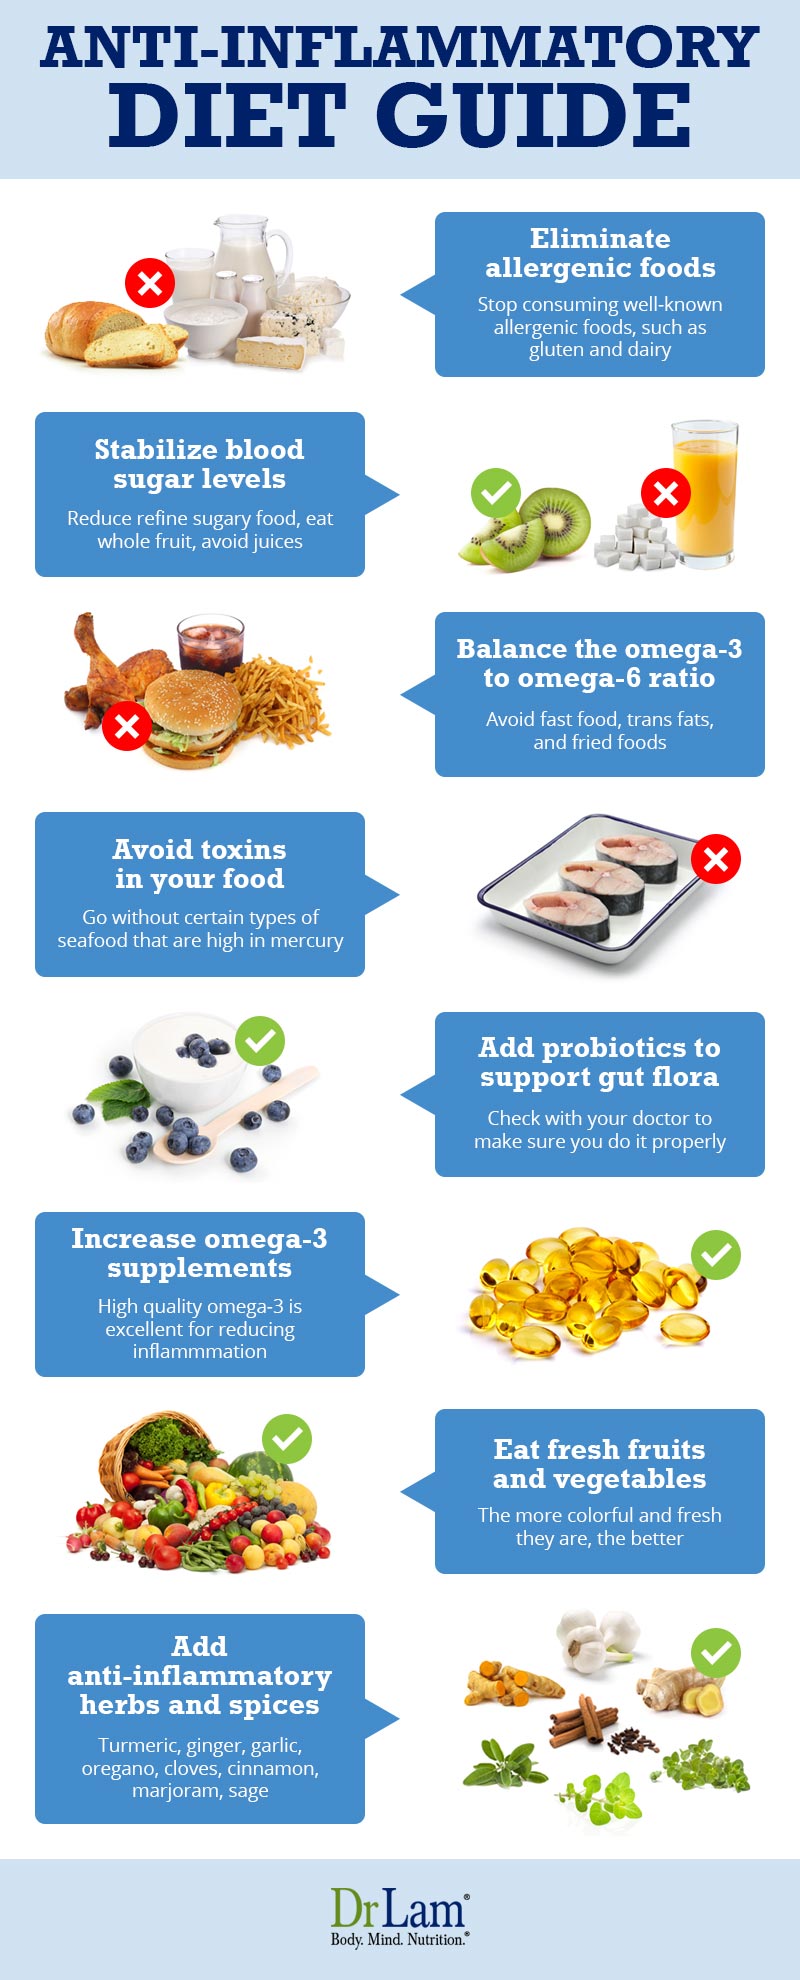 Check out this easy to understand infographic about the anti-inflammatory diet guide